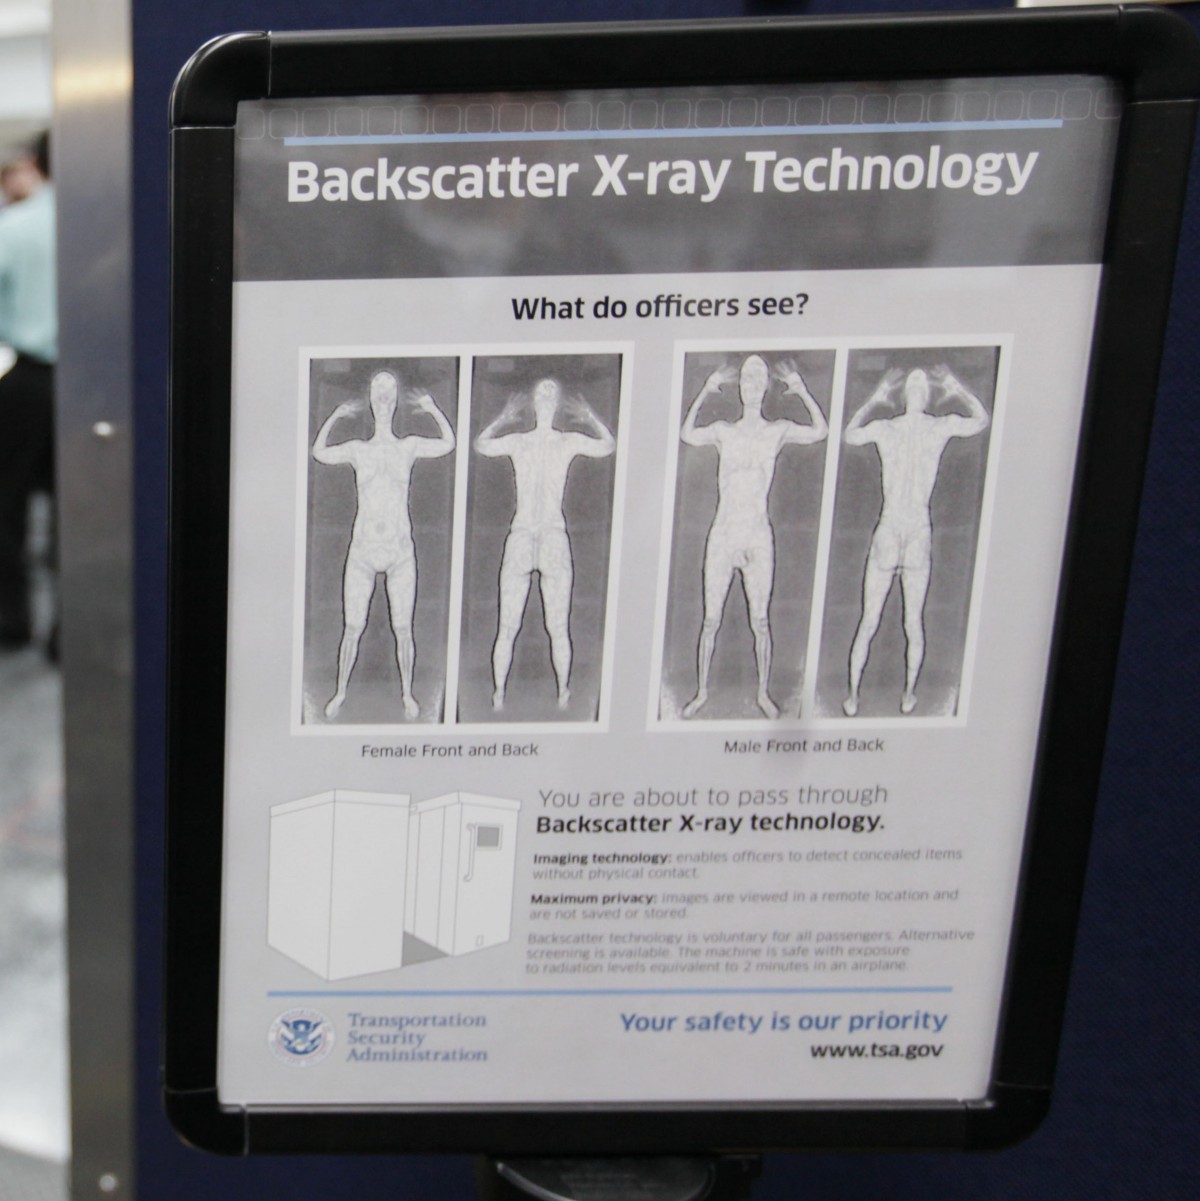 Tsa Defies Court Ban Continues Violating Privacy By Conducting Nude Body Scans